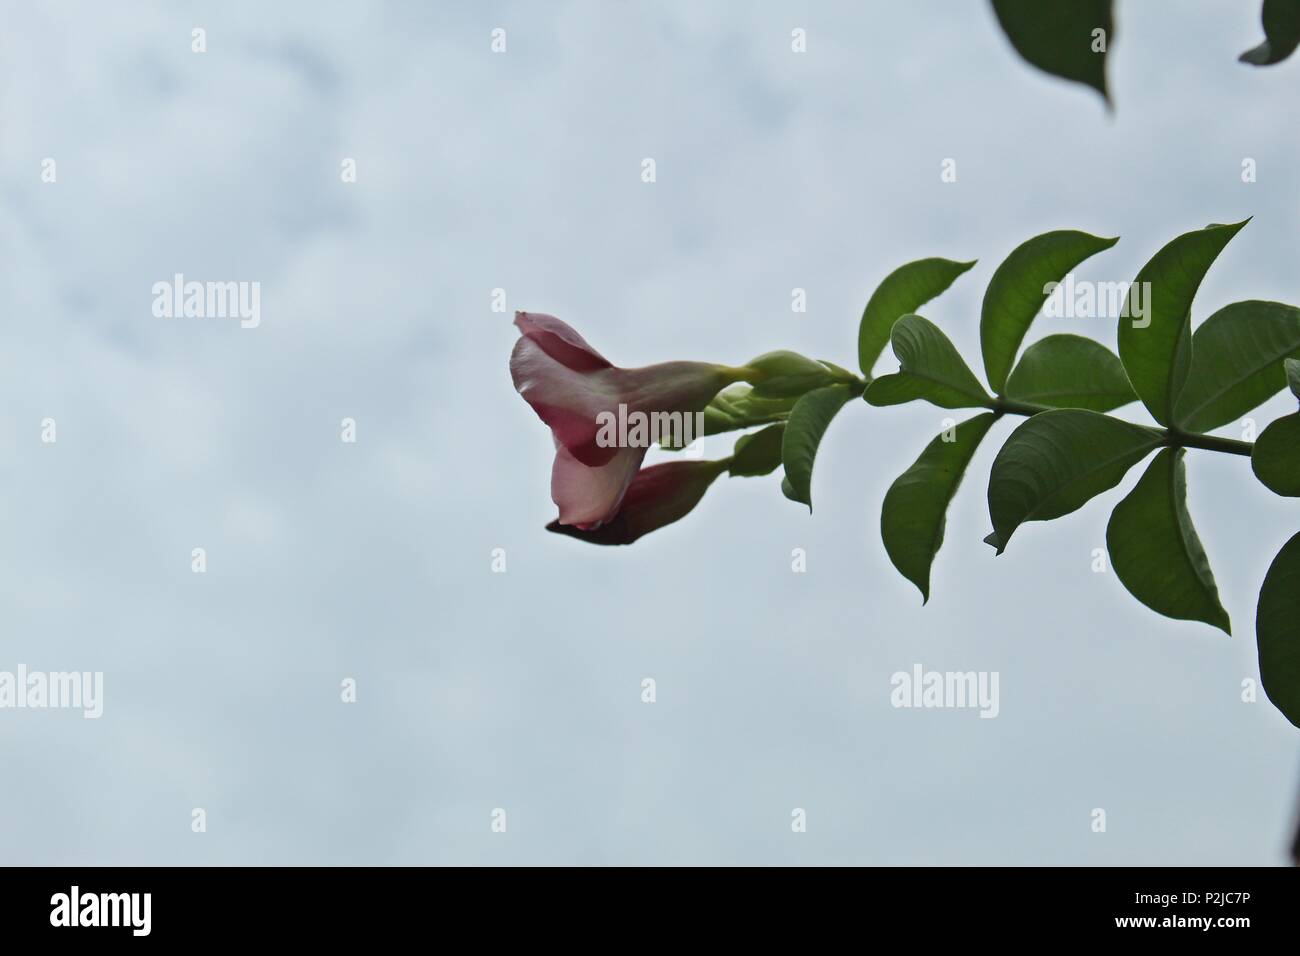 Purple Allamanda flower (Allamanda blanchetii) with green leaves and cloudy sky background. Violet allamanda flower is a species of flowering plant. Stock Photo